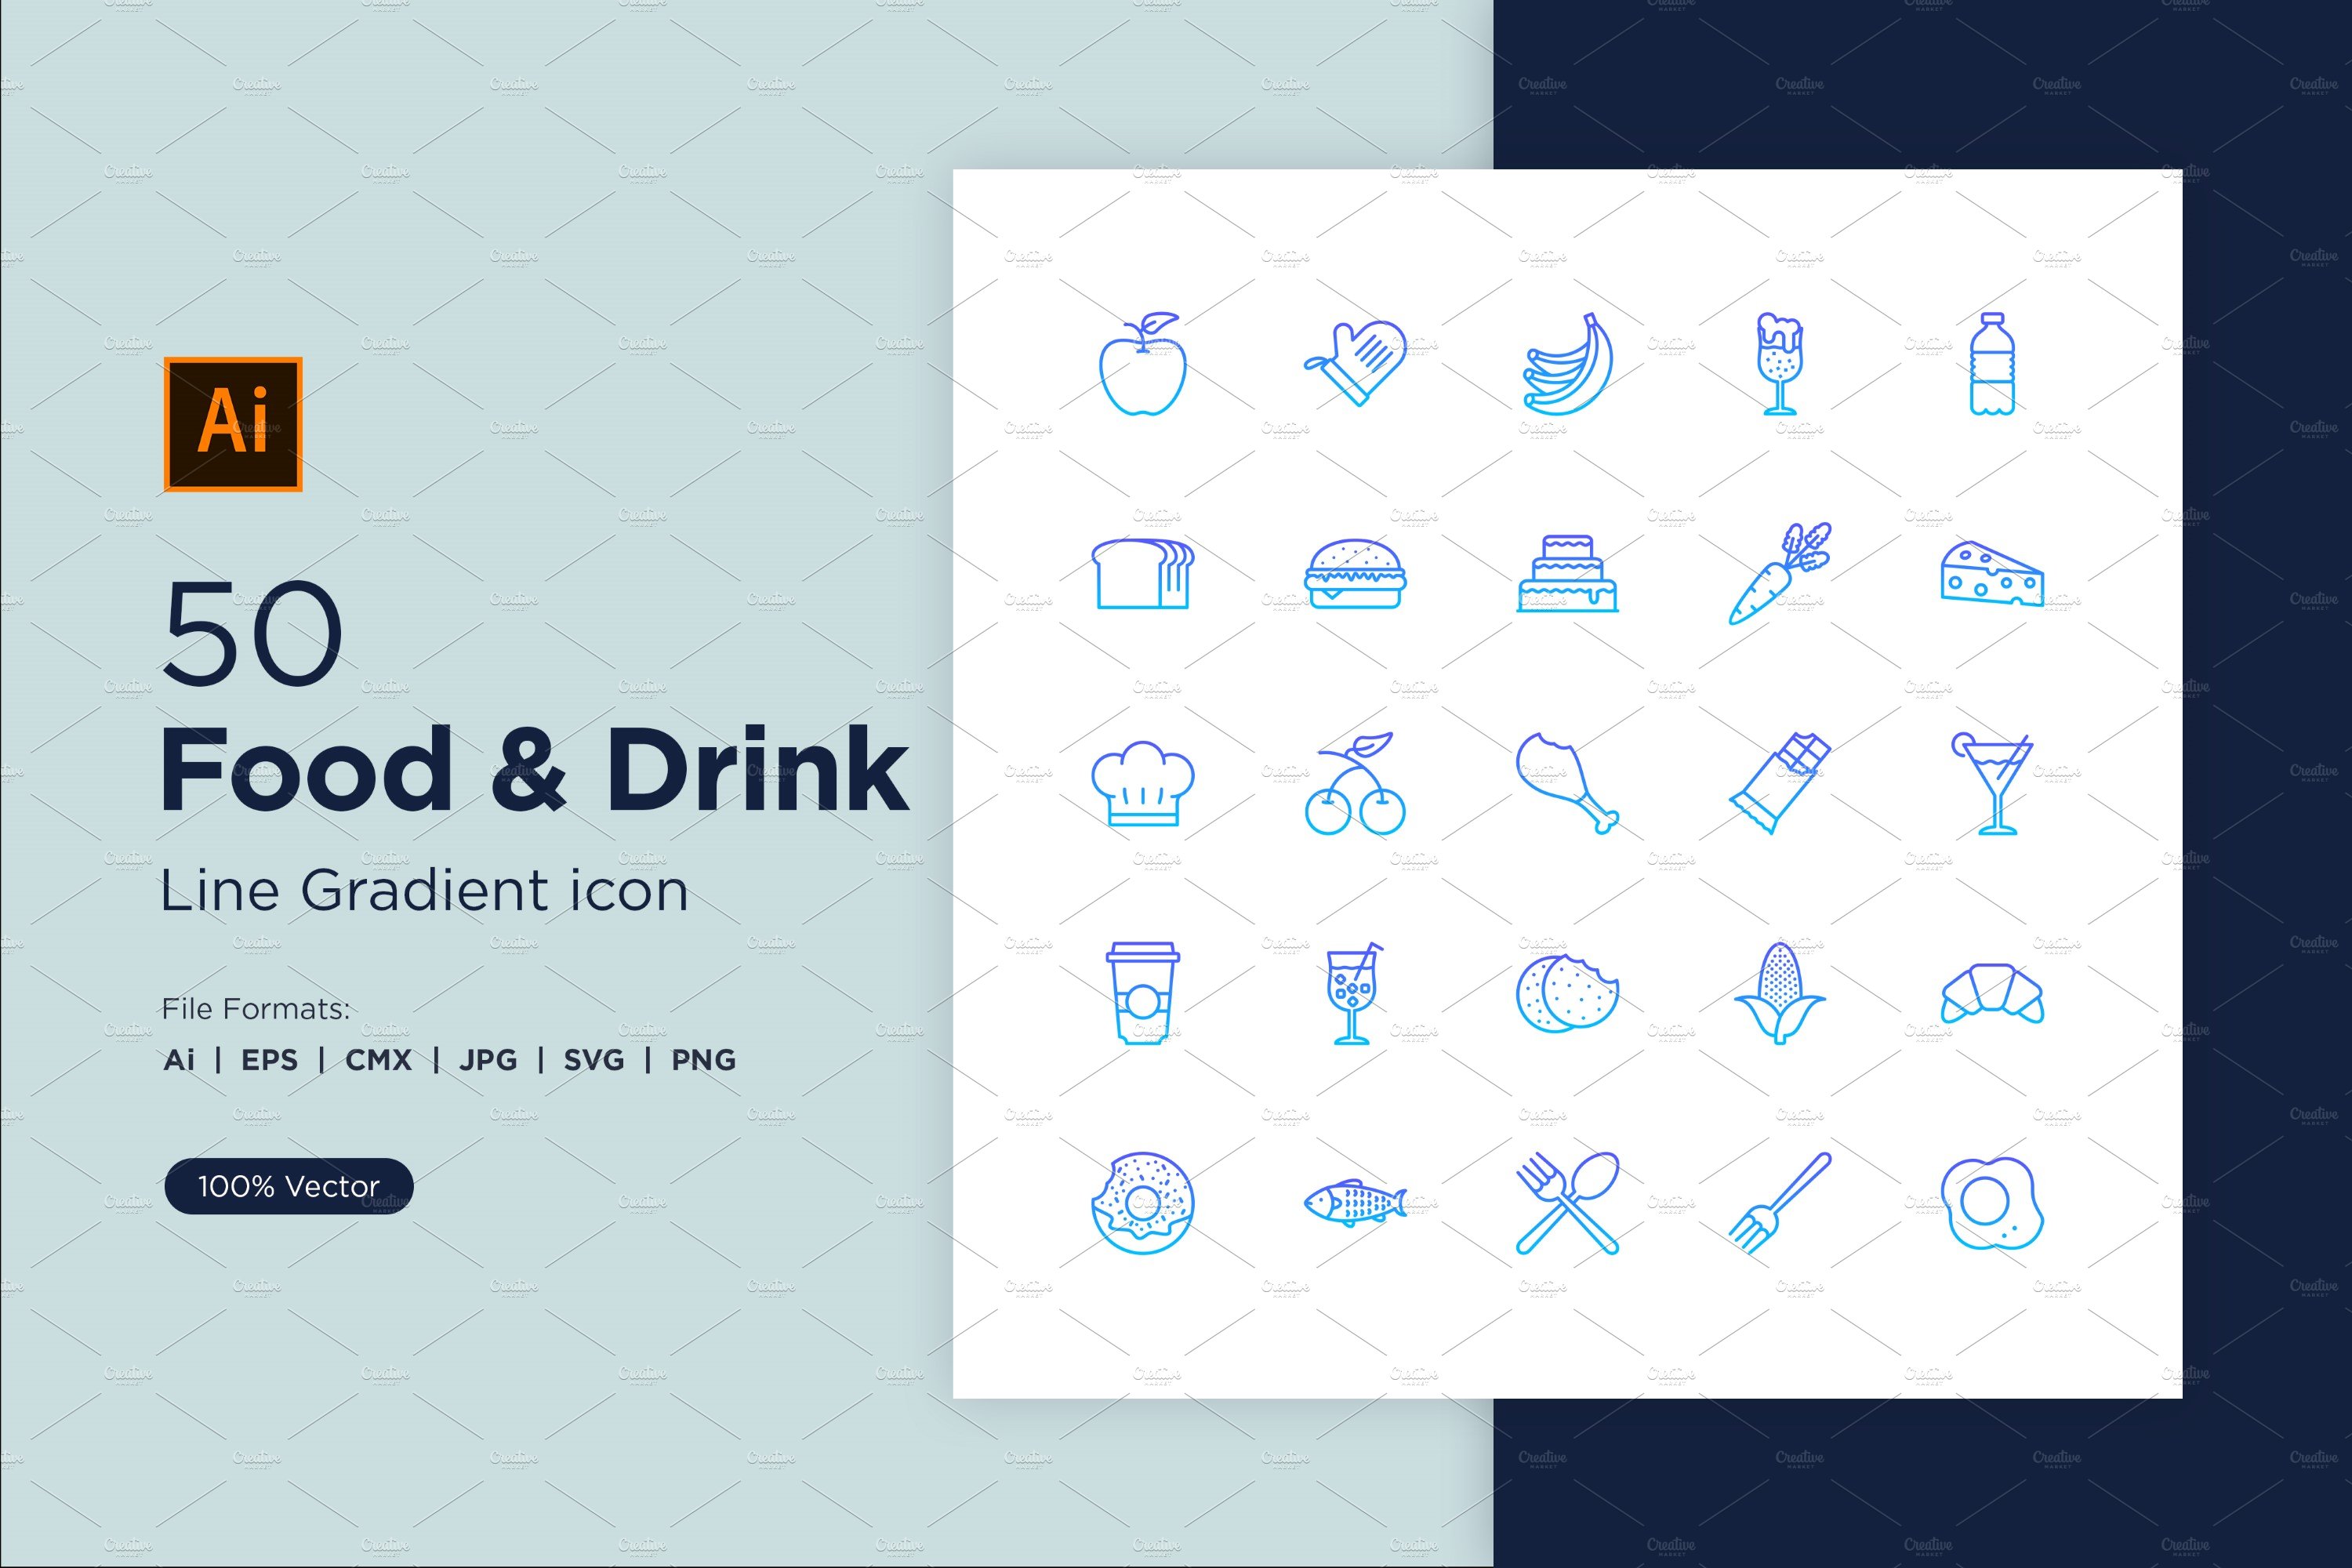 50 Food & Drinks Line Gradient icon cover image.